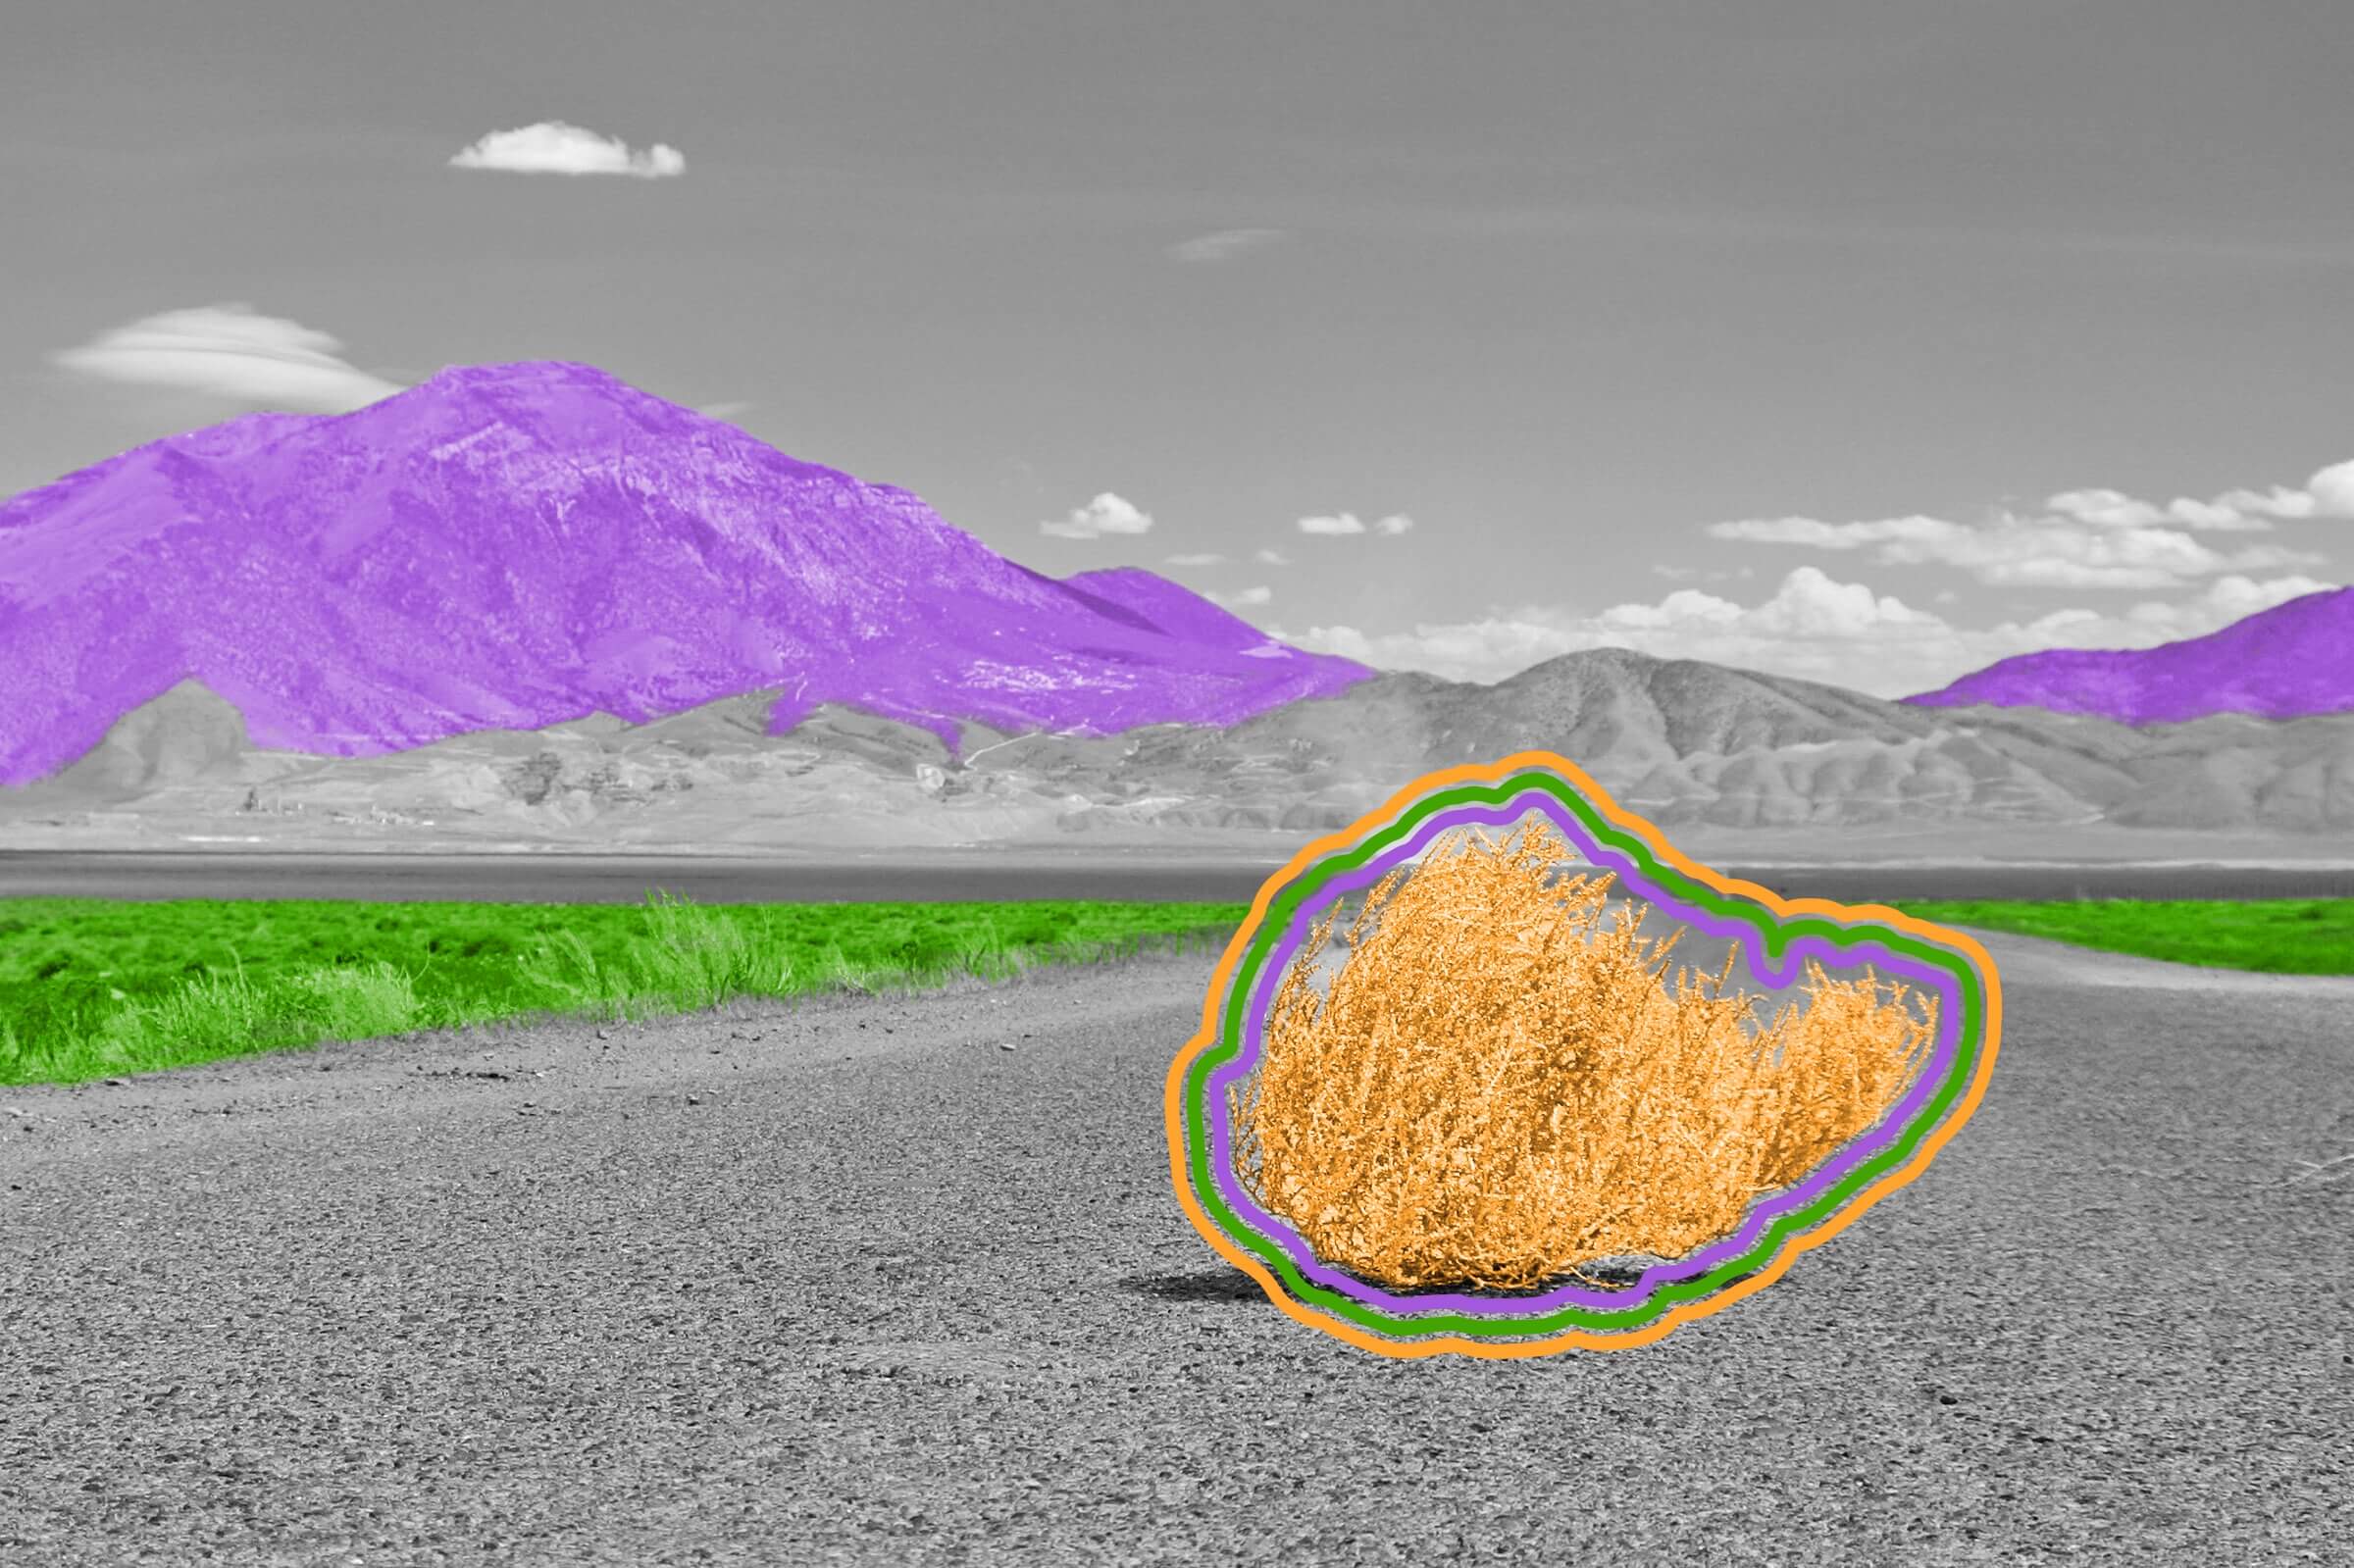 The iconic tumbleweed of the West is not native to North America.